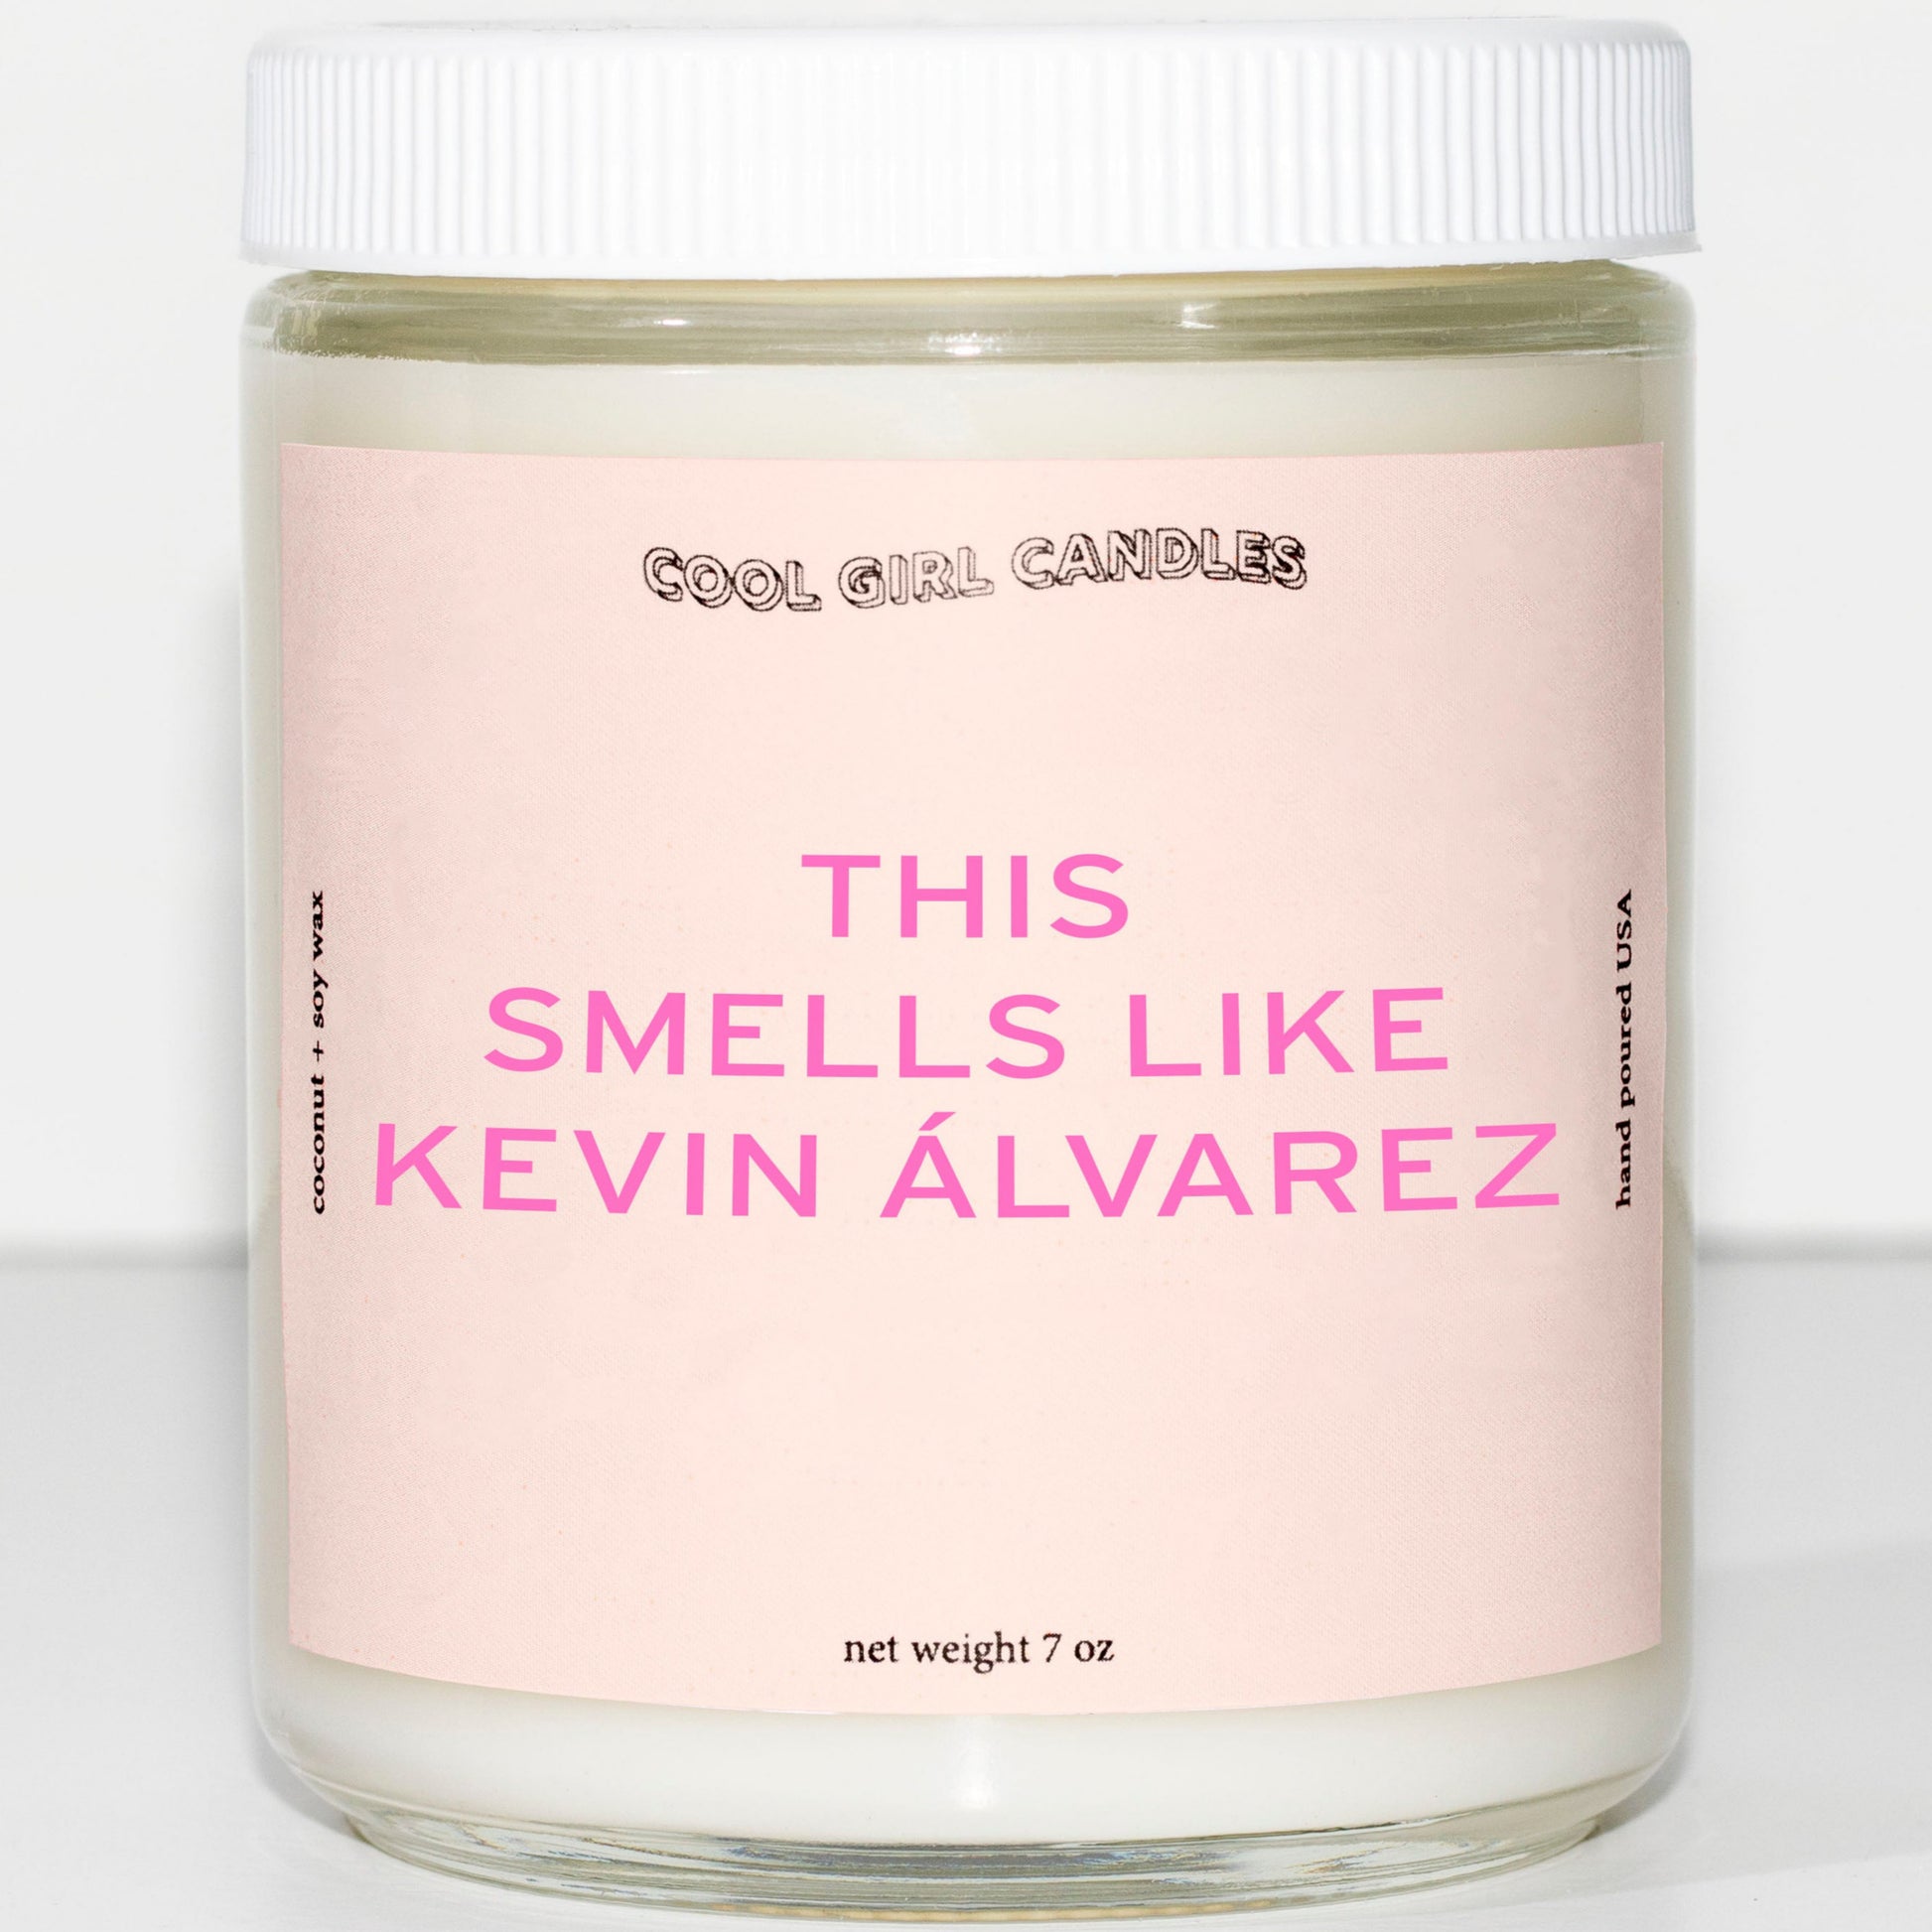 Kevin Alvarez scented candle. Fifa world cup gift. Celebrity scented candle. Soccer fan gift